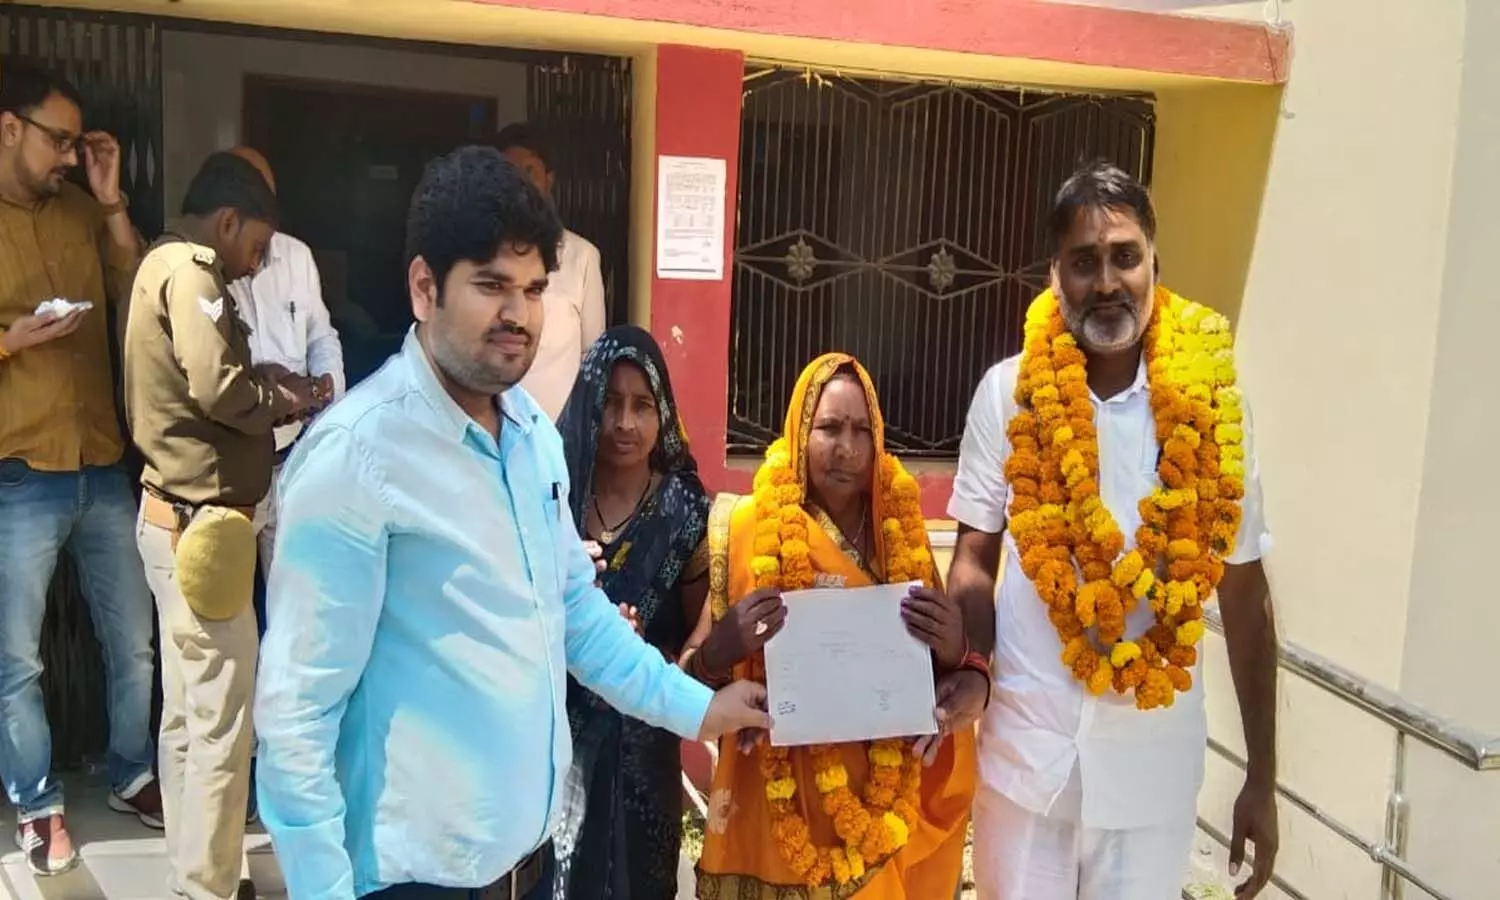 Amrita Devi elected in the by-election, became the village head of Baripur